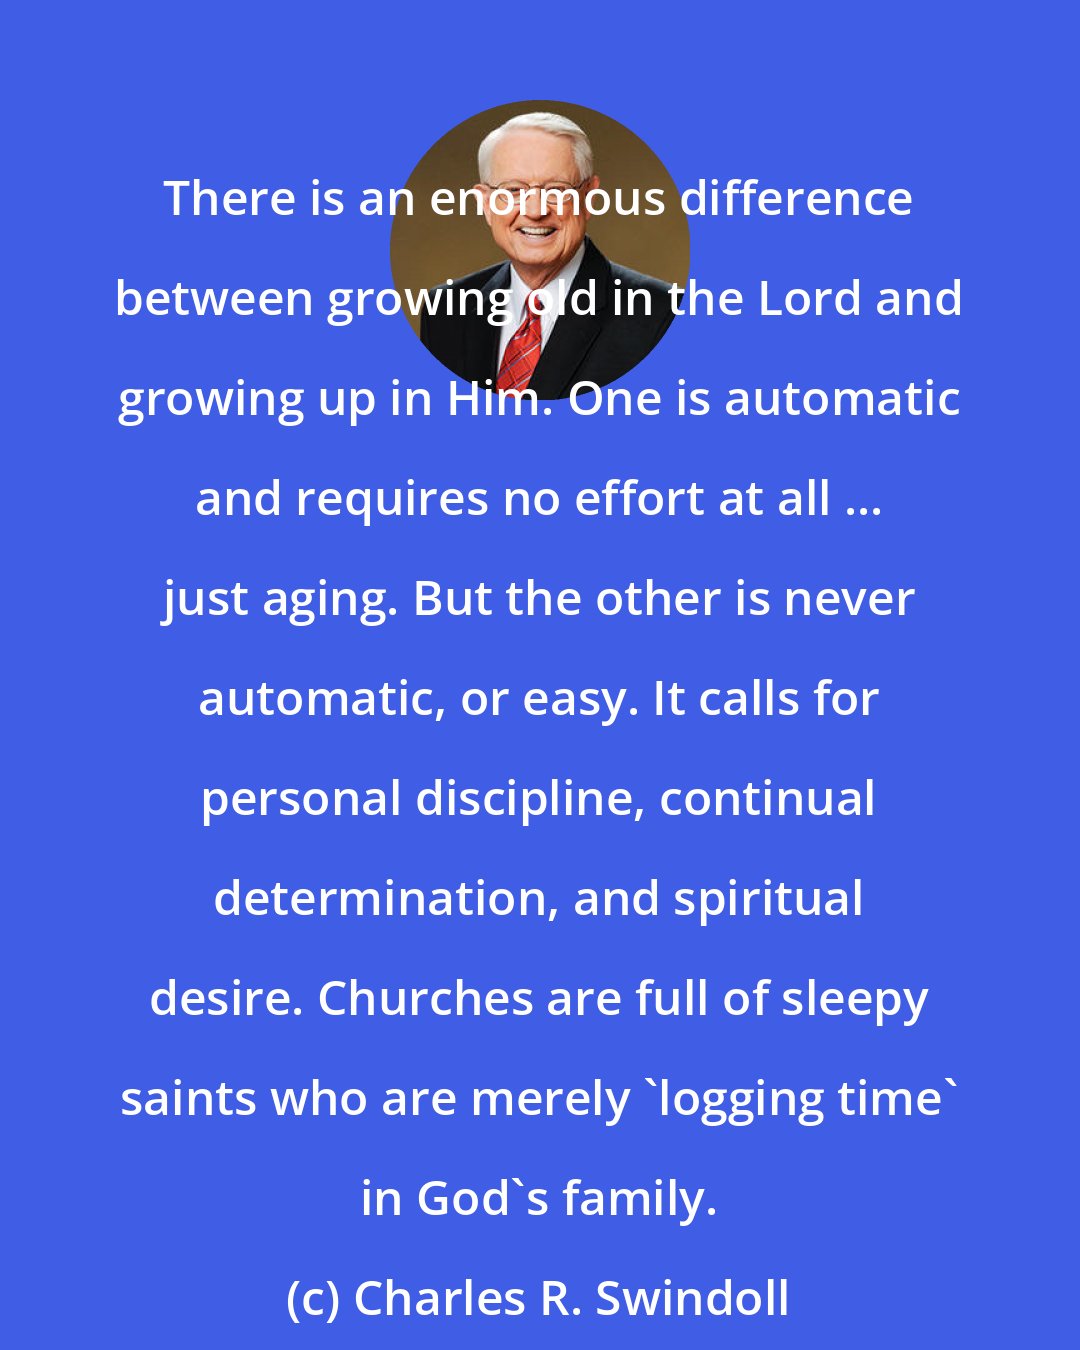 Charles R. Swindoll: There is an enormous difference between growing old in the Lord and growing up in Him. One is automatic and requires no effort at all ... just aging. But the other is never automatic, or easy. It calls for personal discipline, continual determination, and spiritual desire. Churches are full of sleepy saints who are merely 'logging time' in God's family.